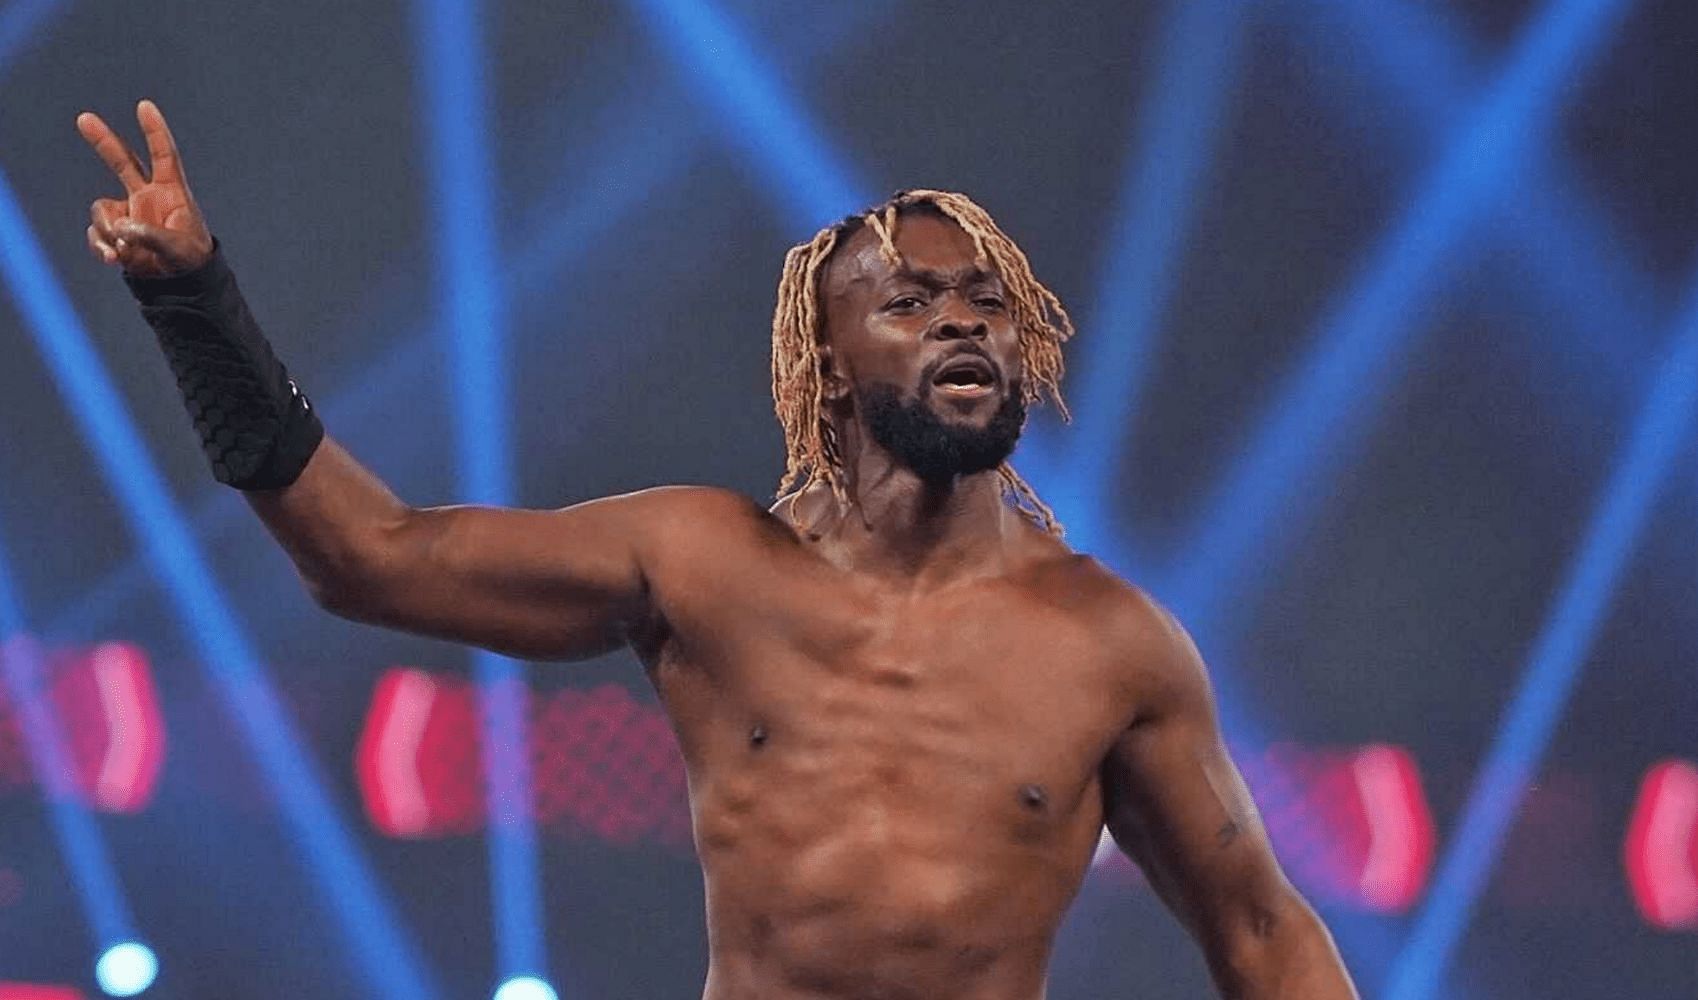 Kofi Kingston is back in the tag team division.